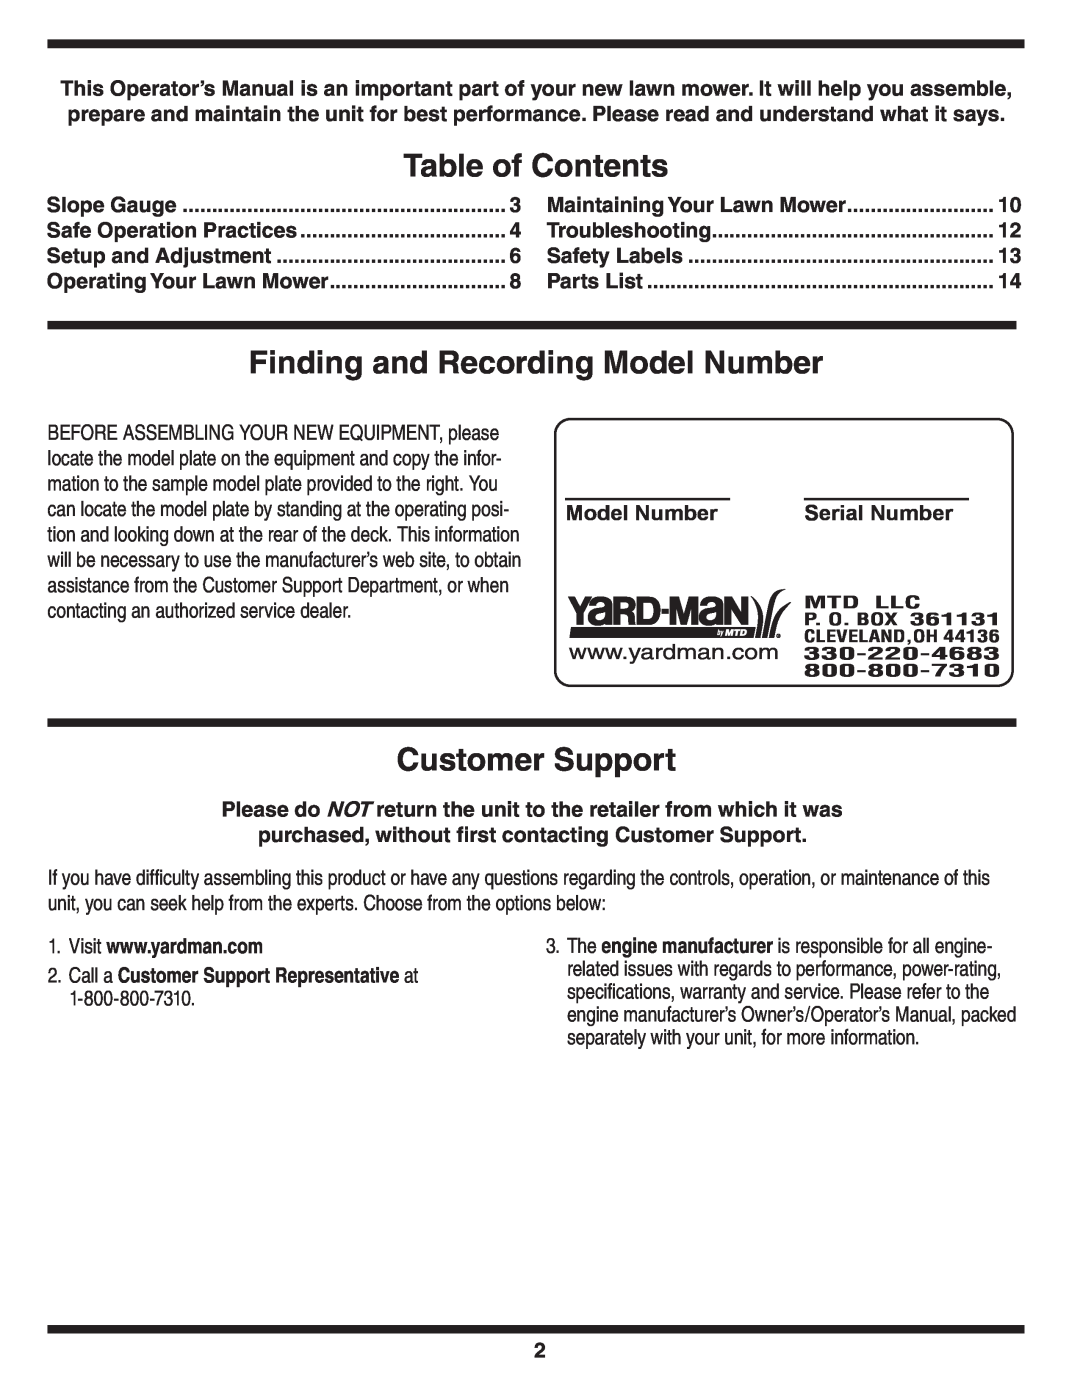 Yard-Man 430 warranty Table of Contents, Finding and Recording Model Number, Customer Support, Serial Number 